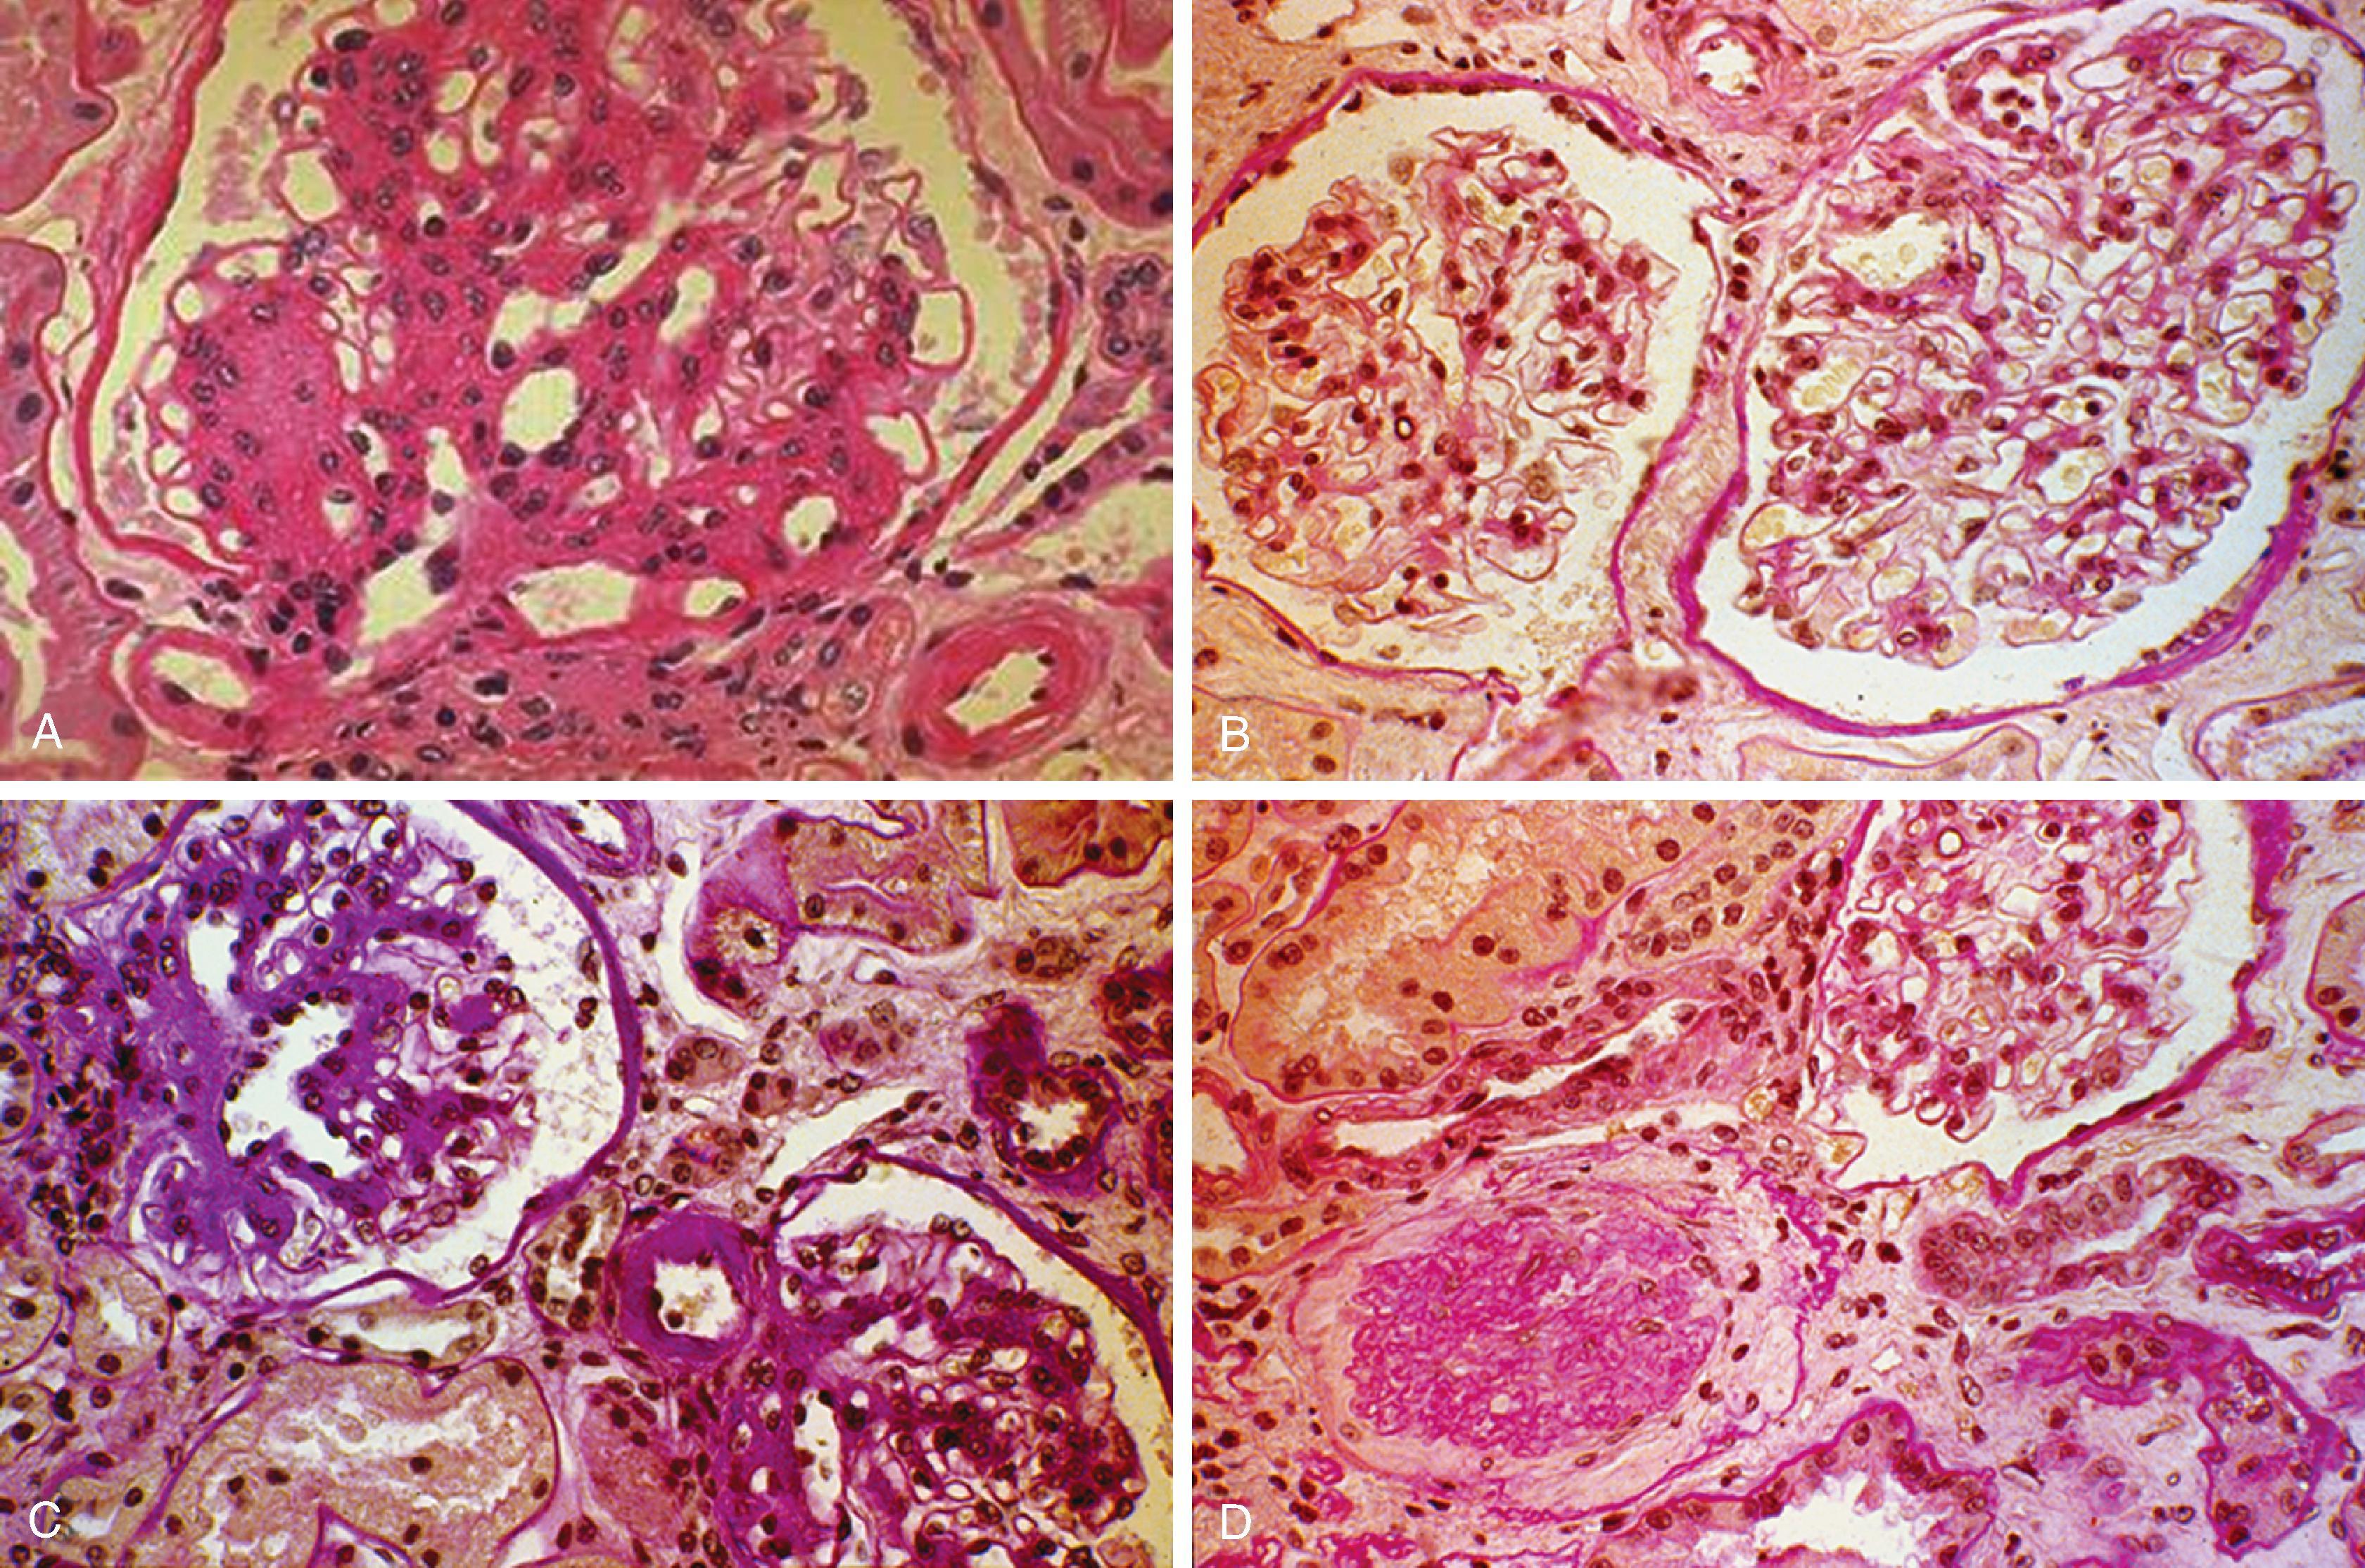 Fig. 26.3, Light microscopy photographs of glomeruli from type 1 (A) and type 2 (B through D) diabetic patients. (A) Diffuse and nodular mesangial expansion and arteriolar hyalinosis in a glomerulus from an individual with type 1 diabetes and moderately elevated albuminuria (periodic acid–Schiff [PAS] stain, original magnification ×400). (B) Normal or near-normal kidney structure in a glomerulus from an individual with type 2 diabetes and moderately elevated albuminuria (PAS stain, ×400). (C) Changes “typical” of diabetic kidney disease (glomerular, tubulointerstitial, and arteriolar changes occurring in parallel) in a kidney biopsy specimen from an individual with type 2 diabetes and moderately elevated albuminuria (PAS stain, ×400). (D) “Atypical” patterns of injury, with absent or only mild diabetic glomerular changes associated with disproportionately severe tubulointerstitial changes. Note also a glomerulus undergoing glomerular sclerosis (PAS stain, ×400) (B through D).